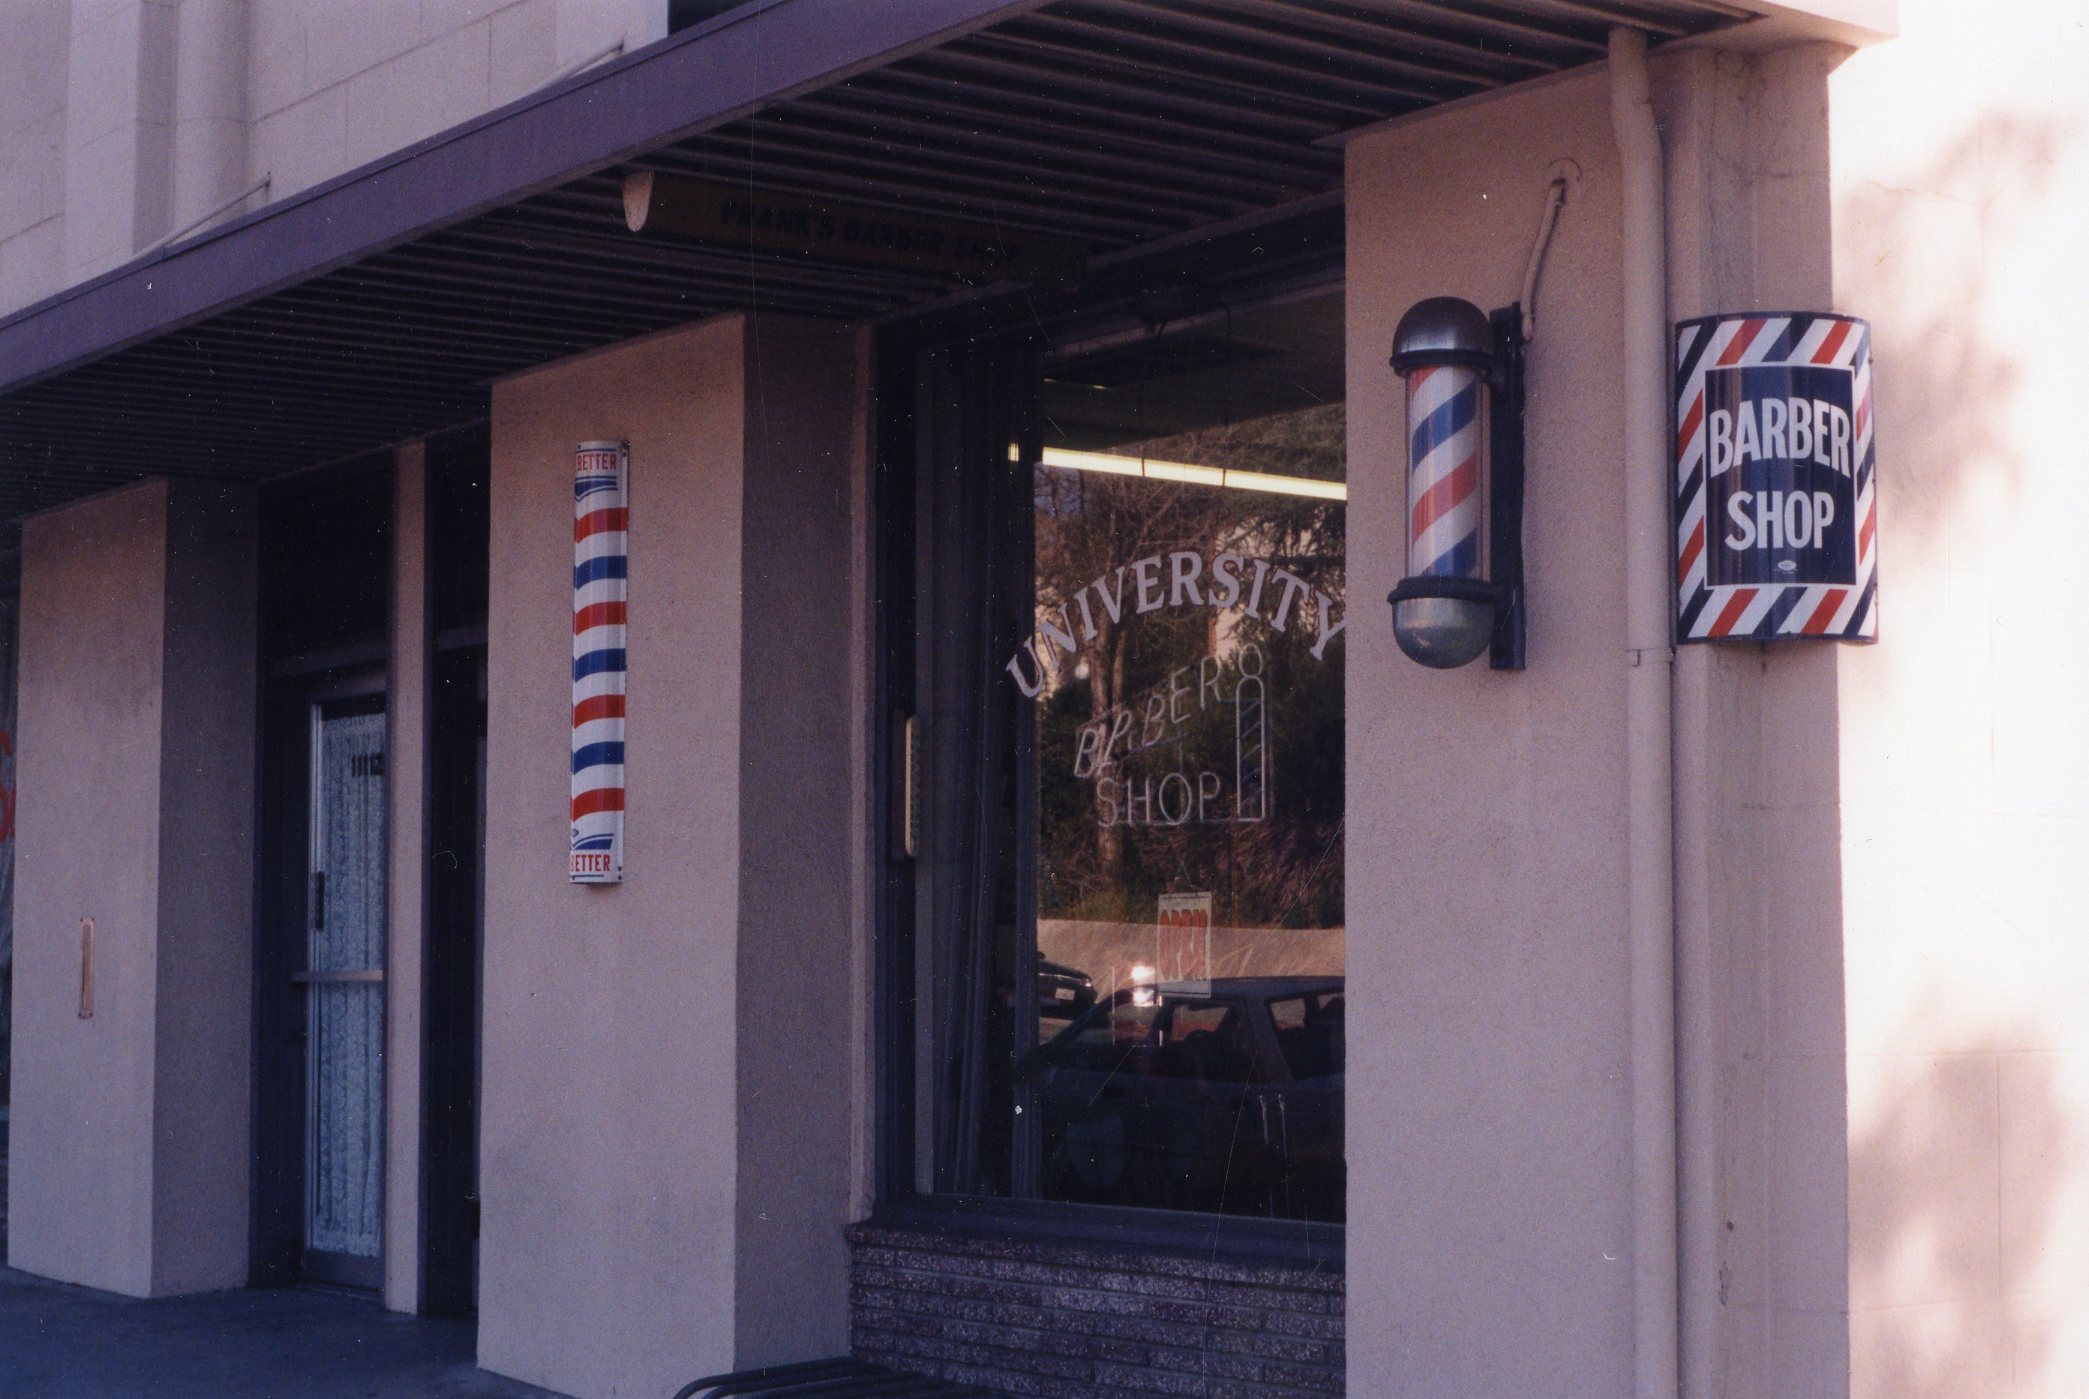 Frank's Barber Shop now known as University Barber Shop is conveniently located on Anderson Street.